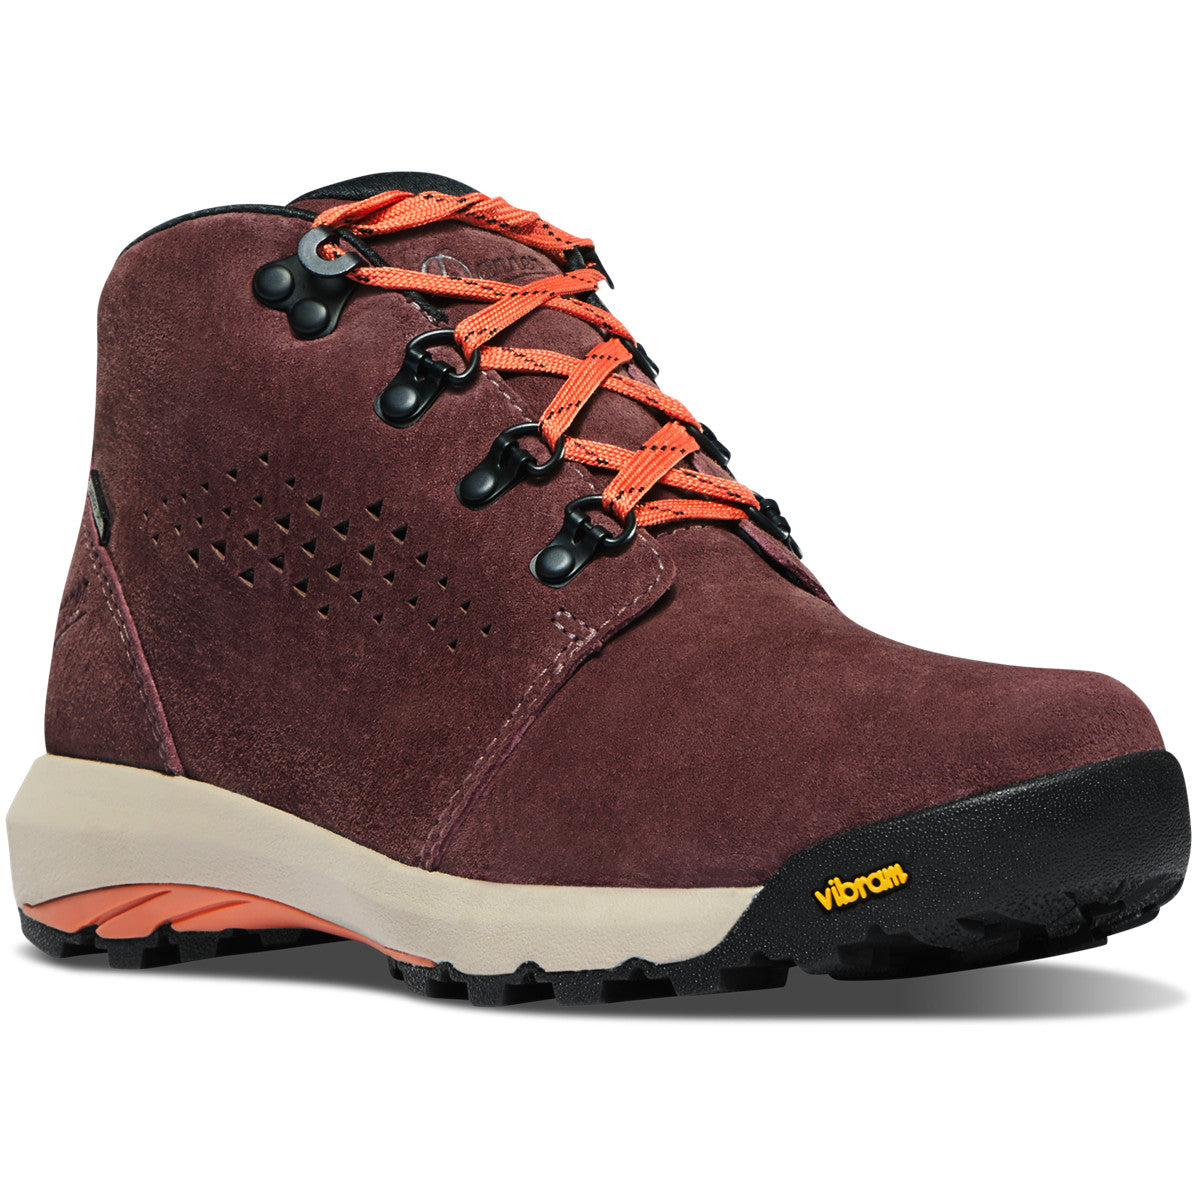 New Danner hikers and boots